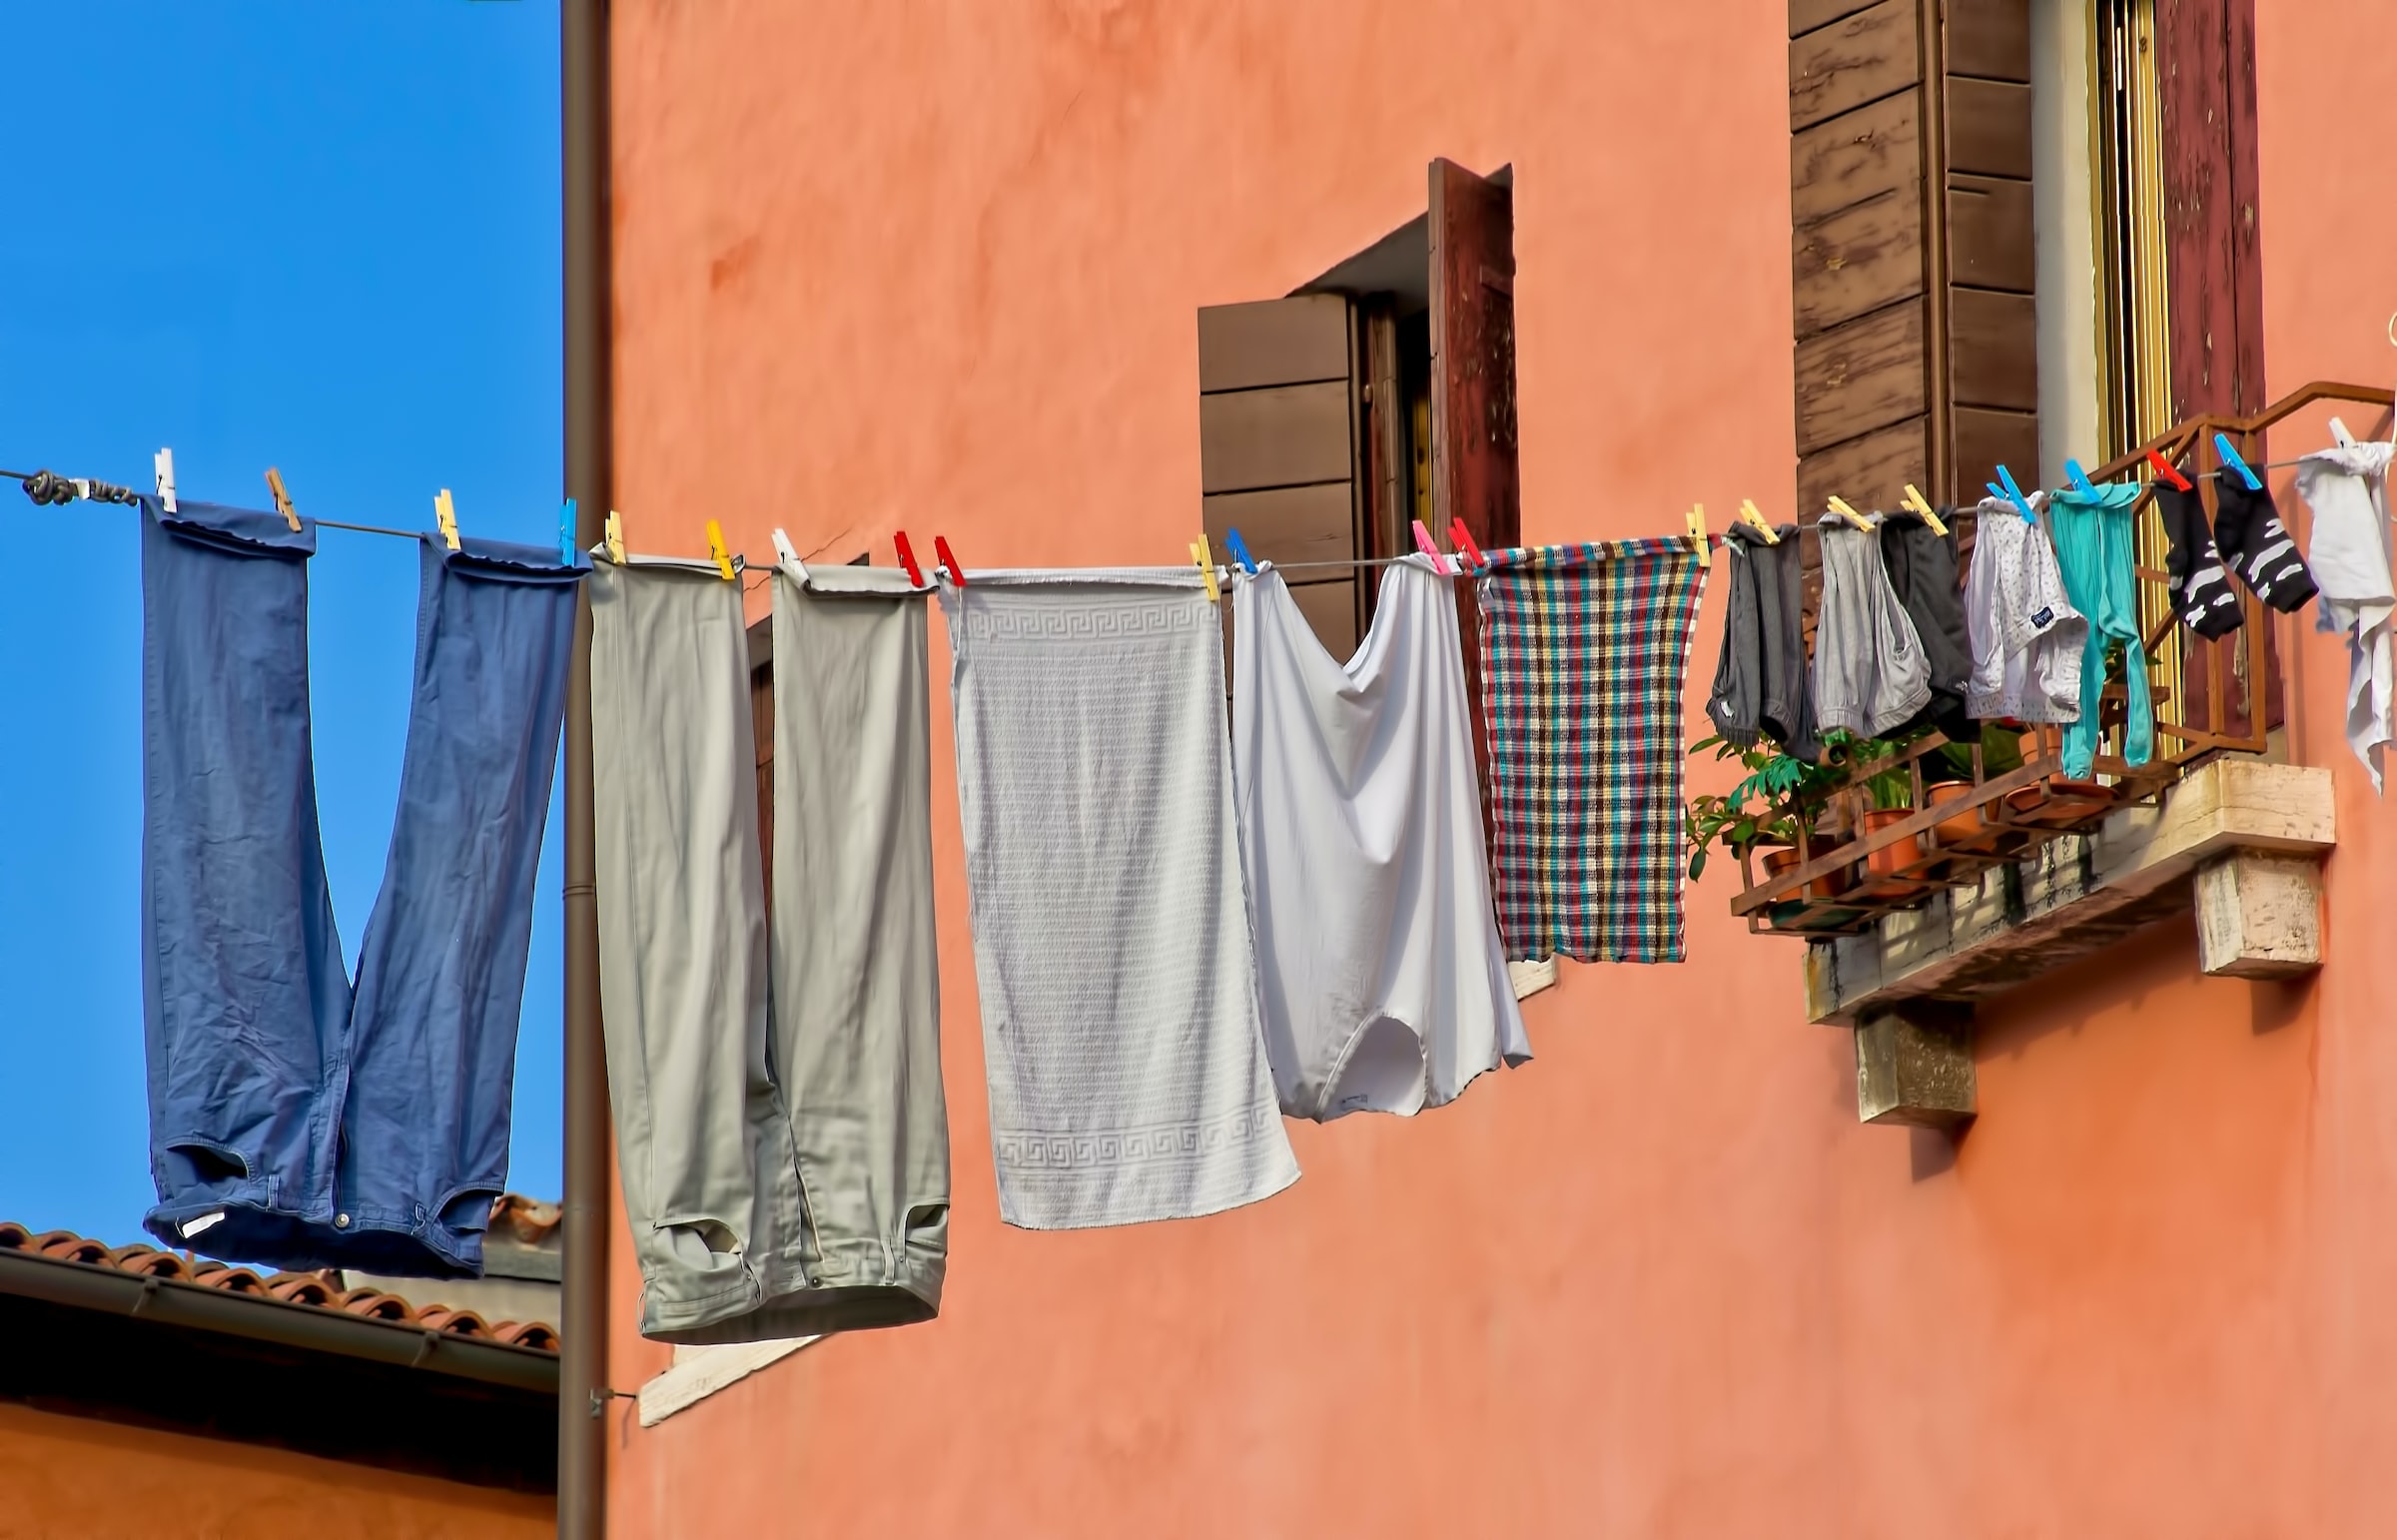 Laundry hanging to dry over a street